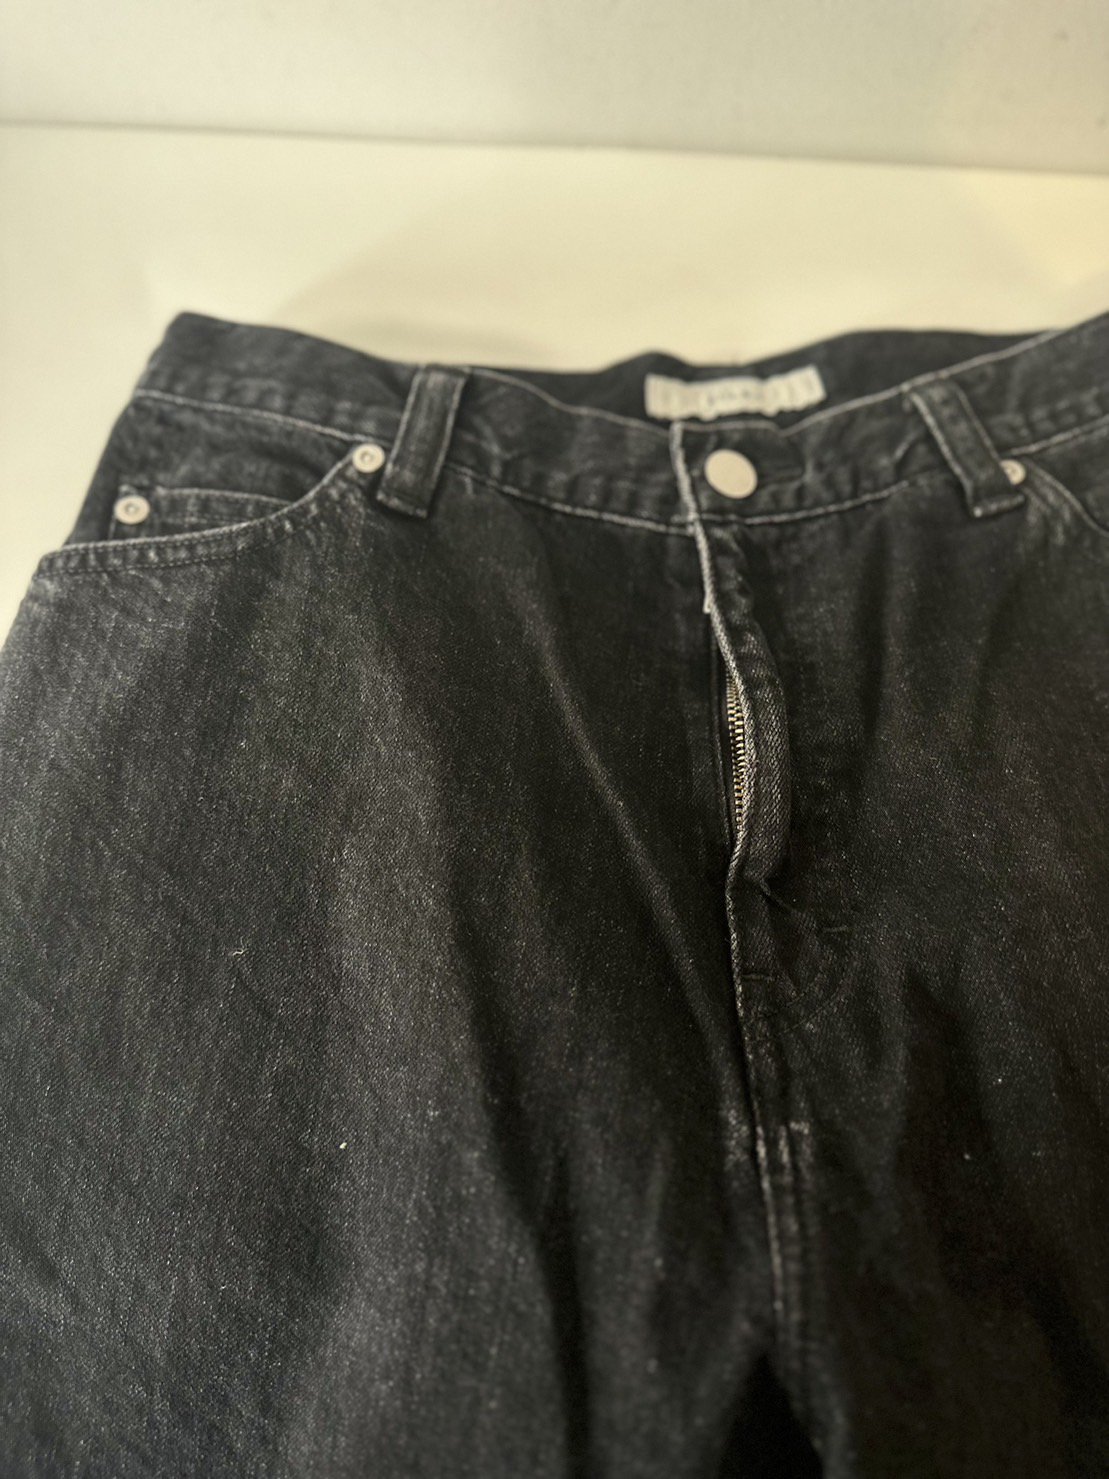 JieDa<br />USED BAGGY DENIM / BLACK<img class='new_mark_img2' src='https://img.shop-pro.jp/img/new/icons14.gif' style='border:none;display:inline;margin:0px;padding:0px;width:auto;' />